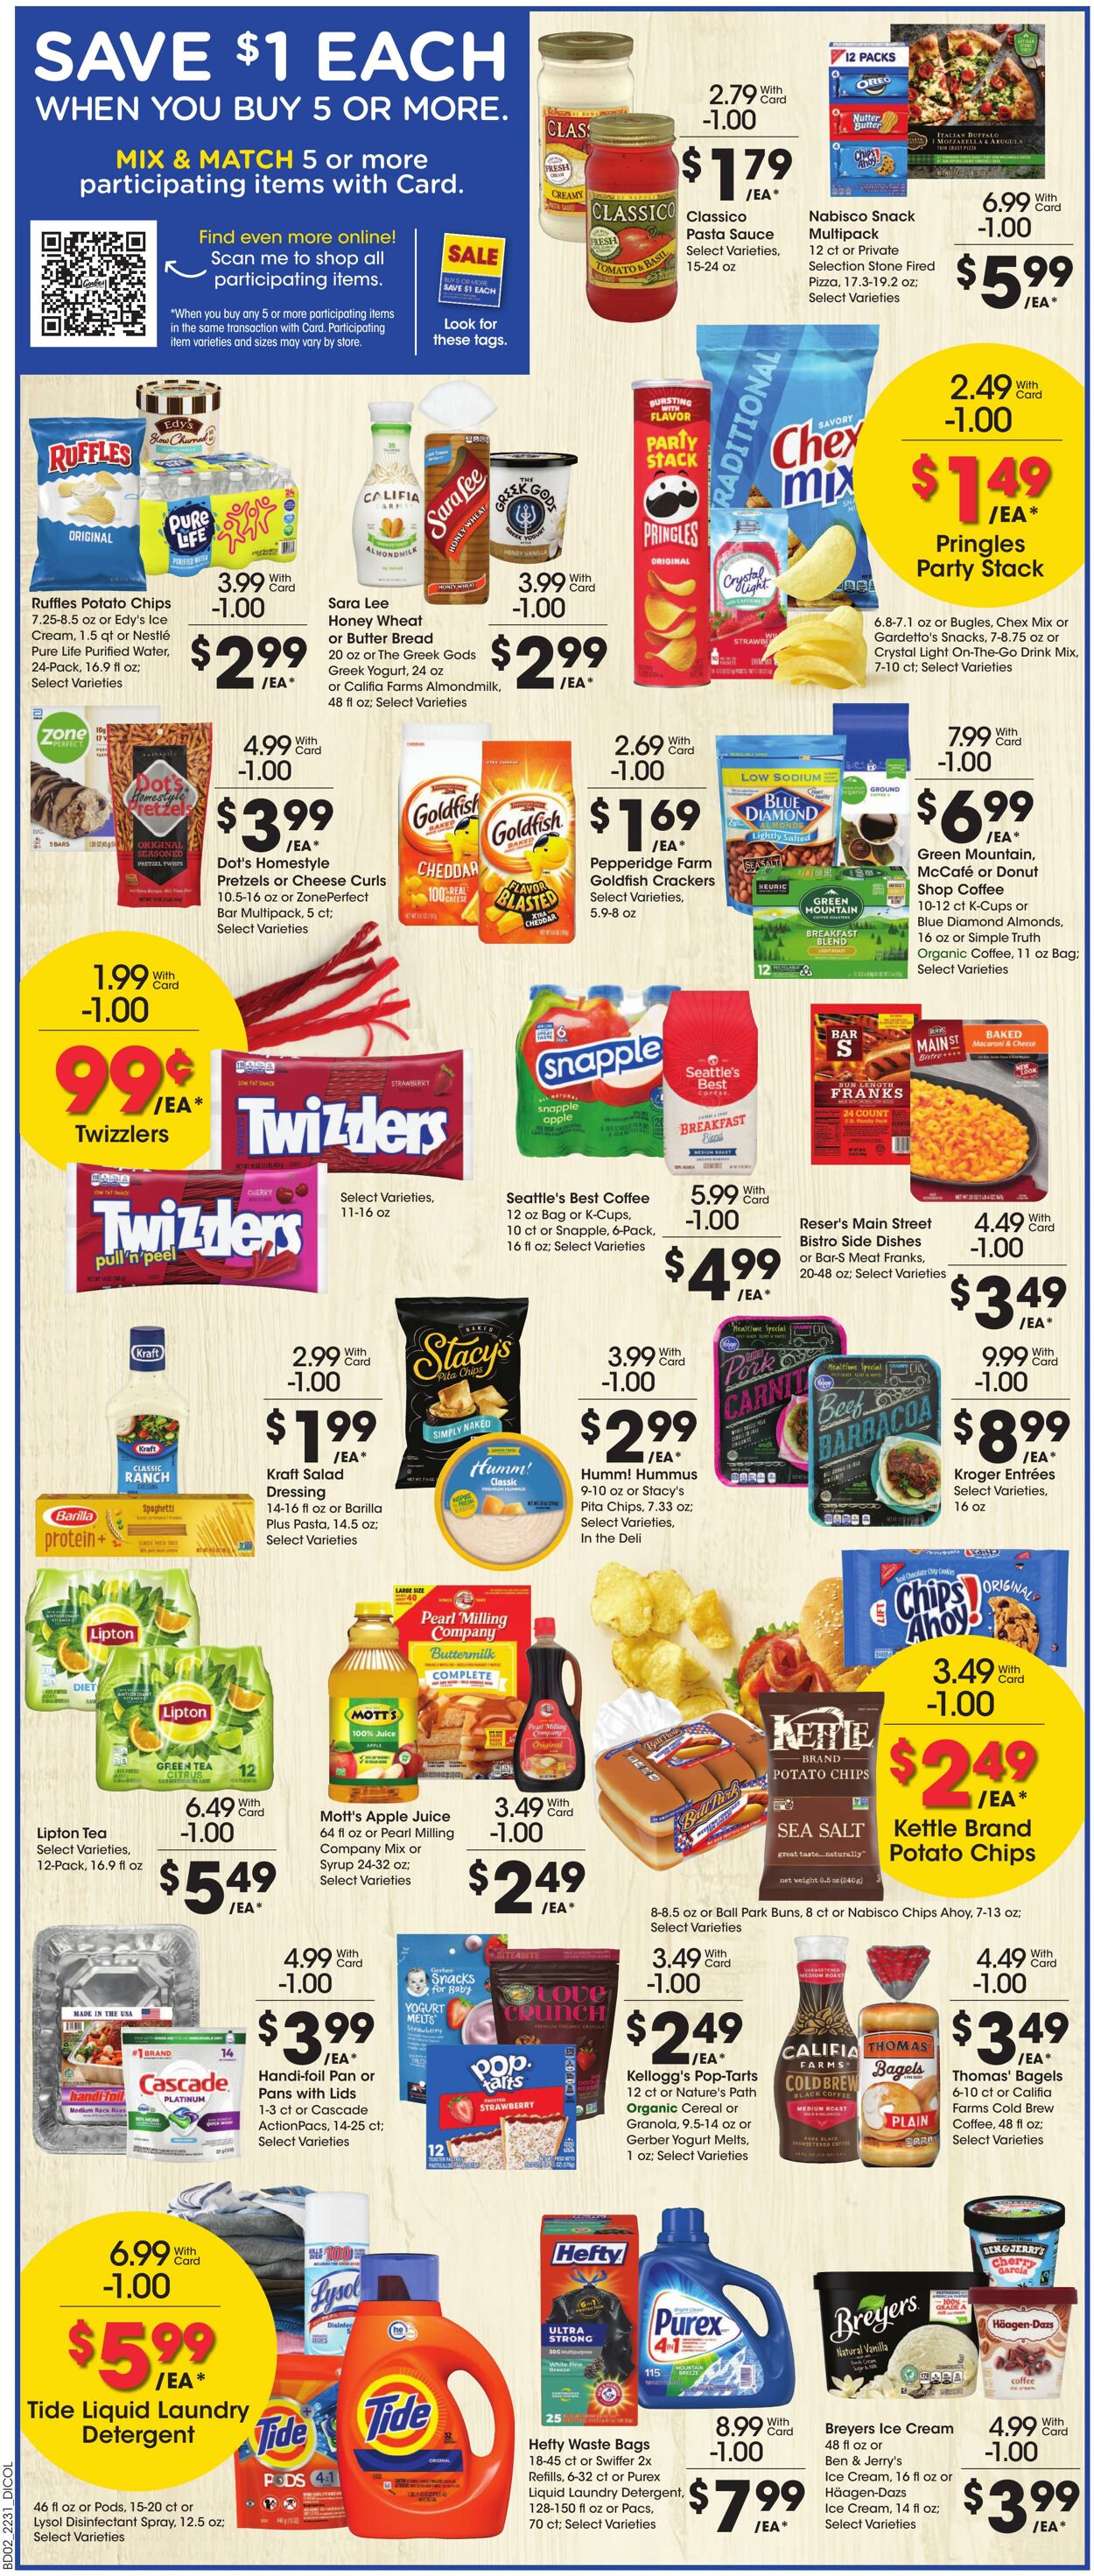 Weekly ad Gerbes Supermarkets 08/31/2022 - 09/06/2022